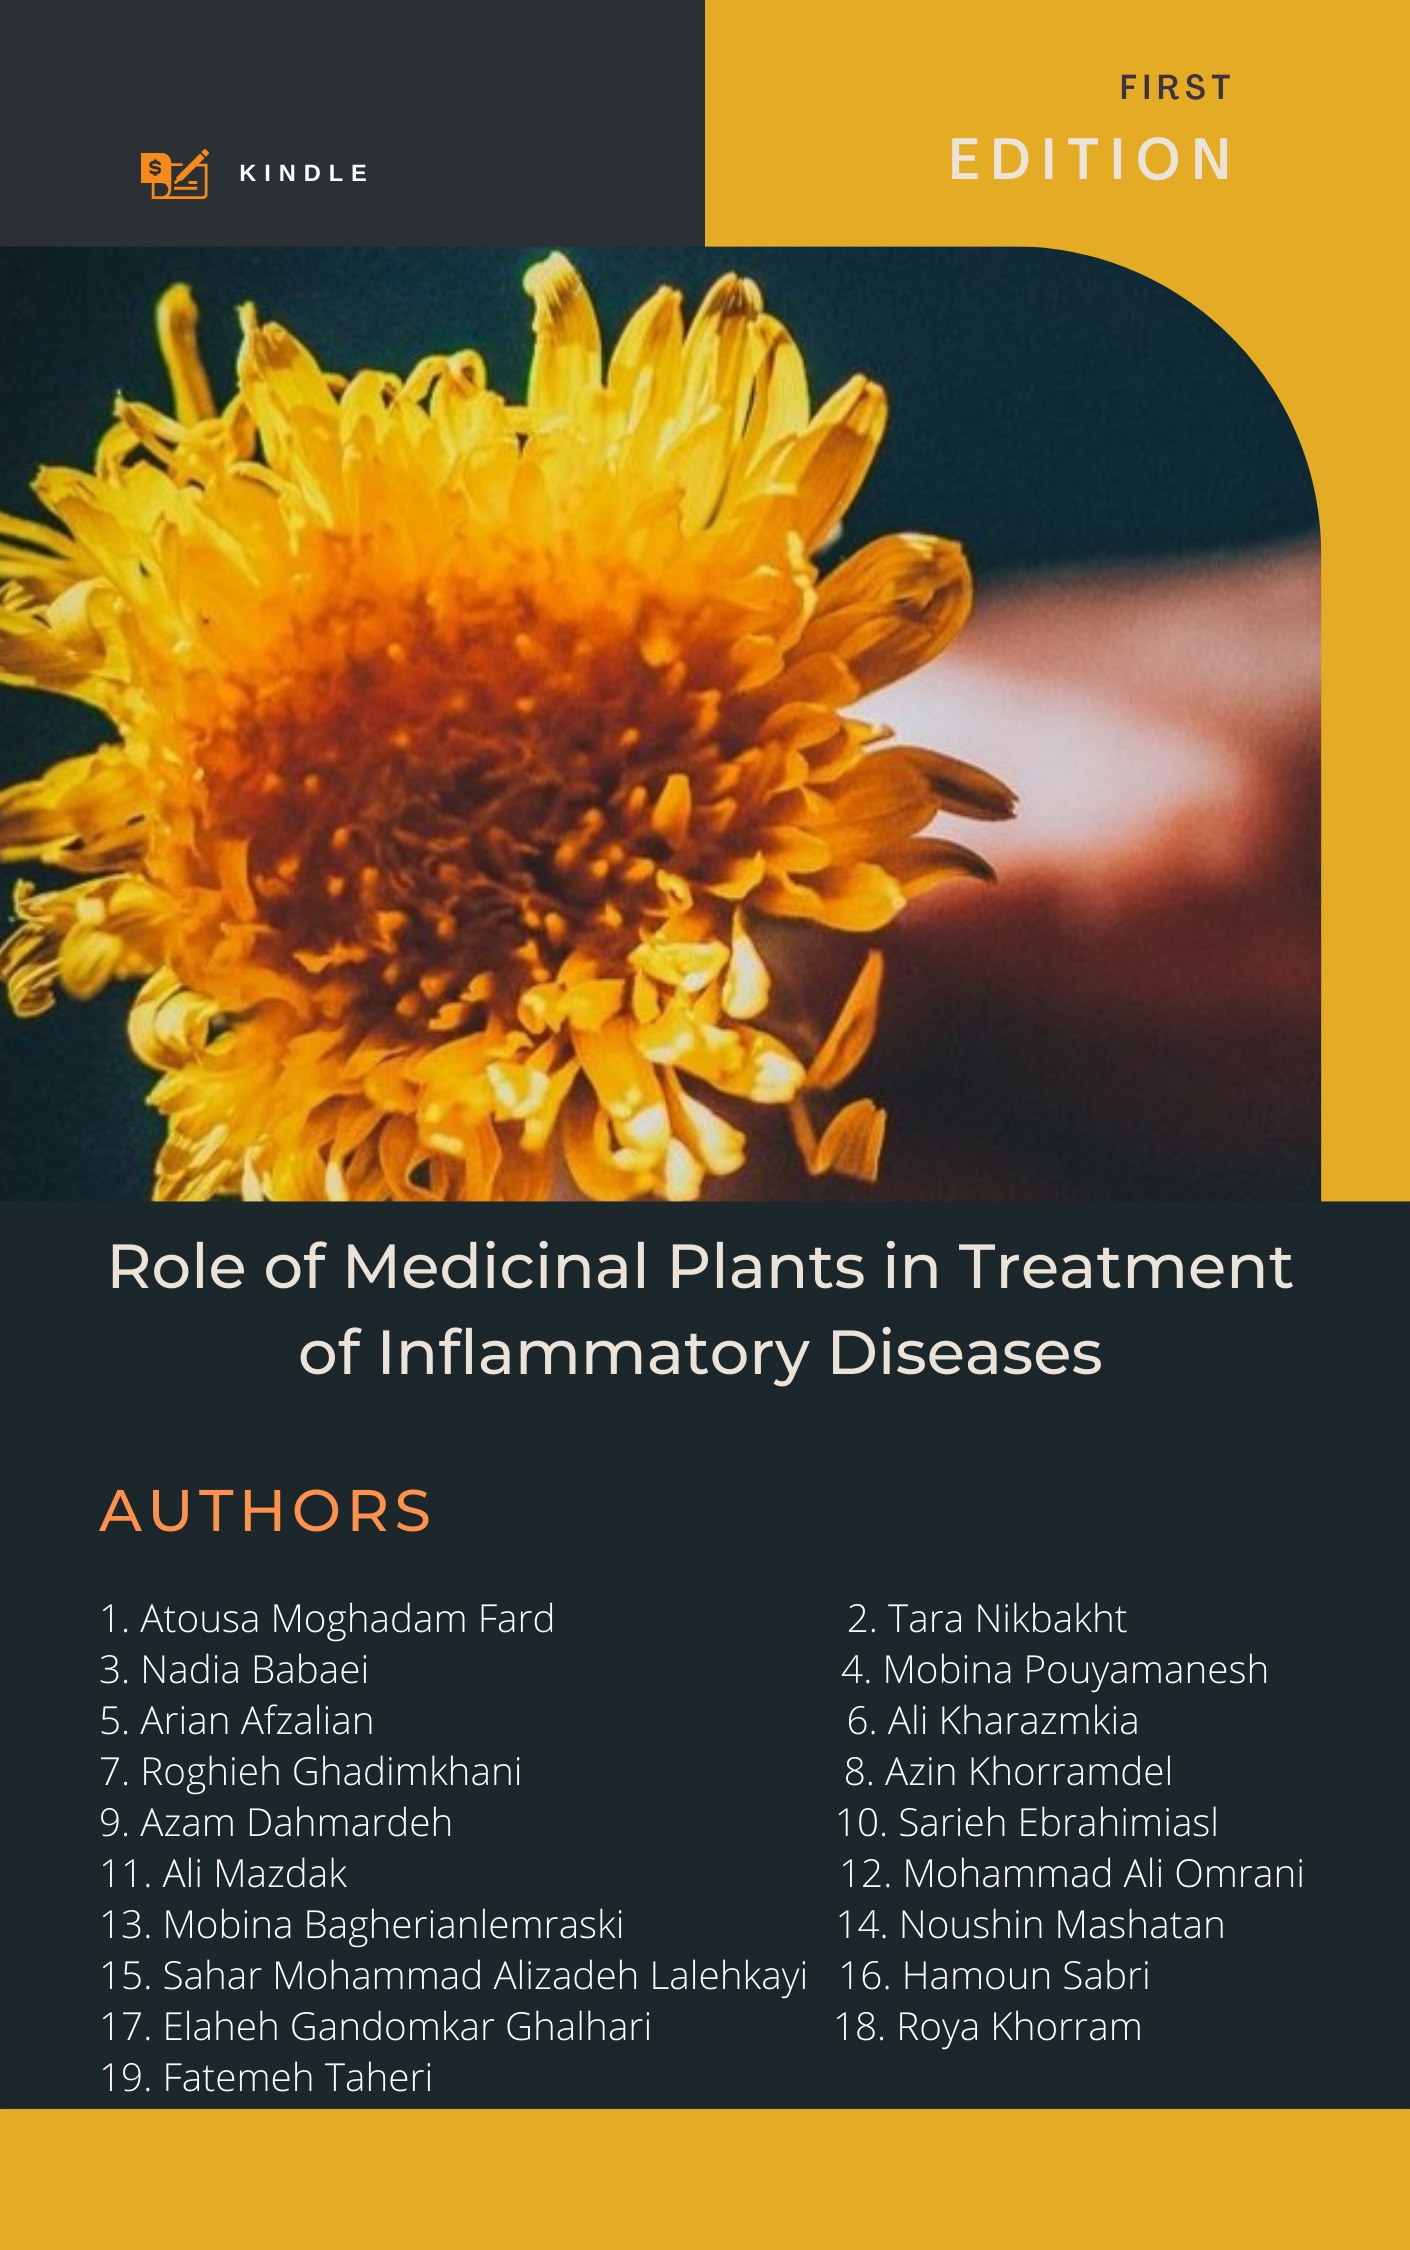 Role of Medicinal Plants in Treatment of Inflammatory Diseases